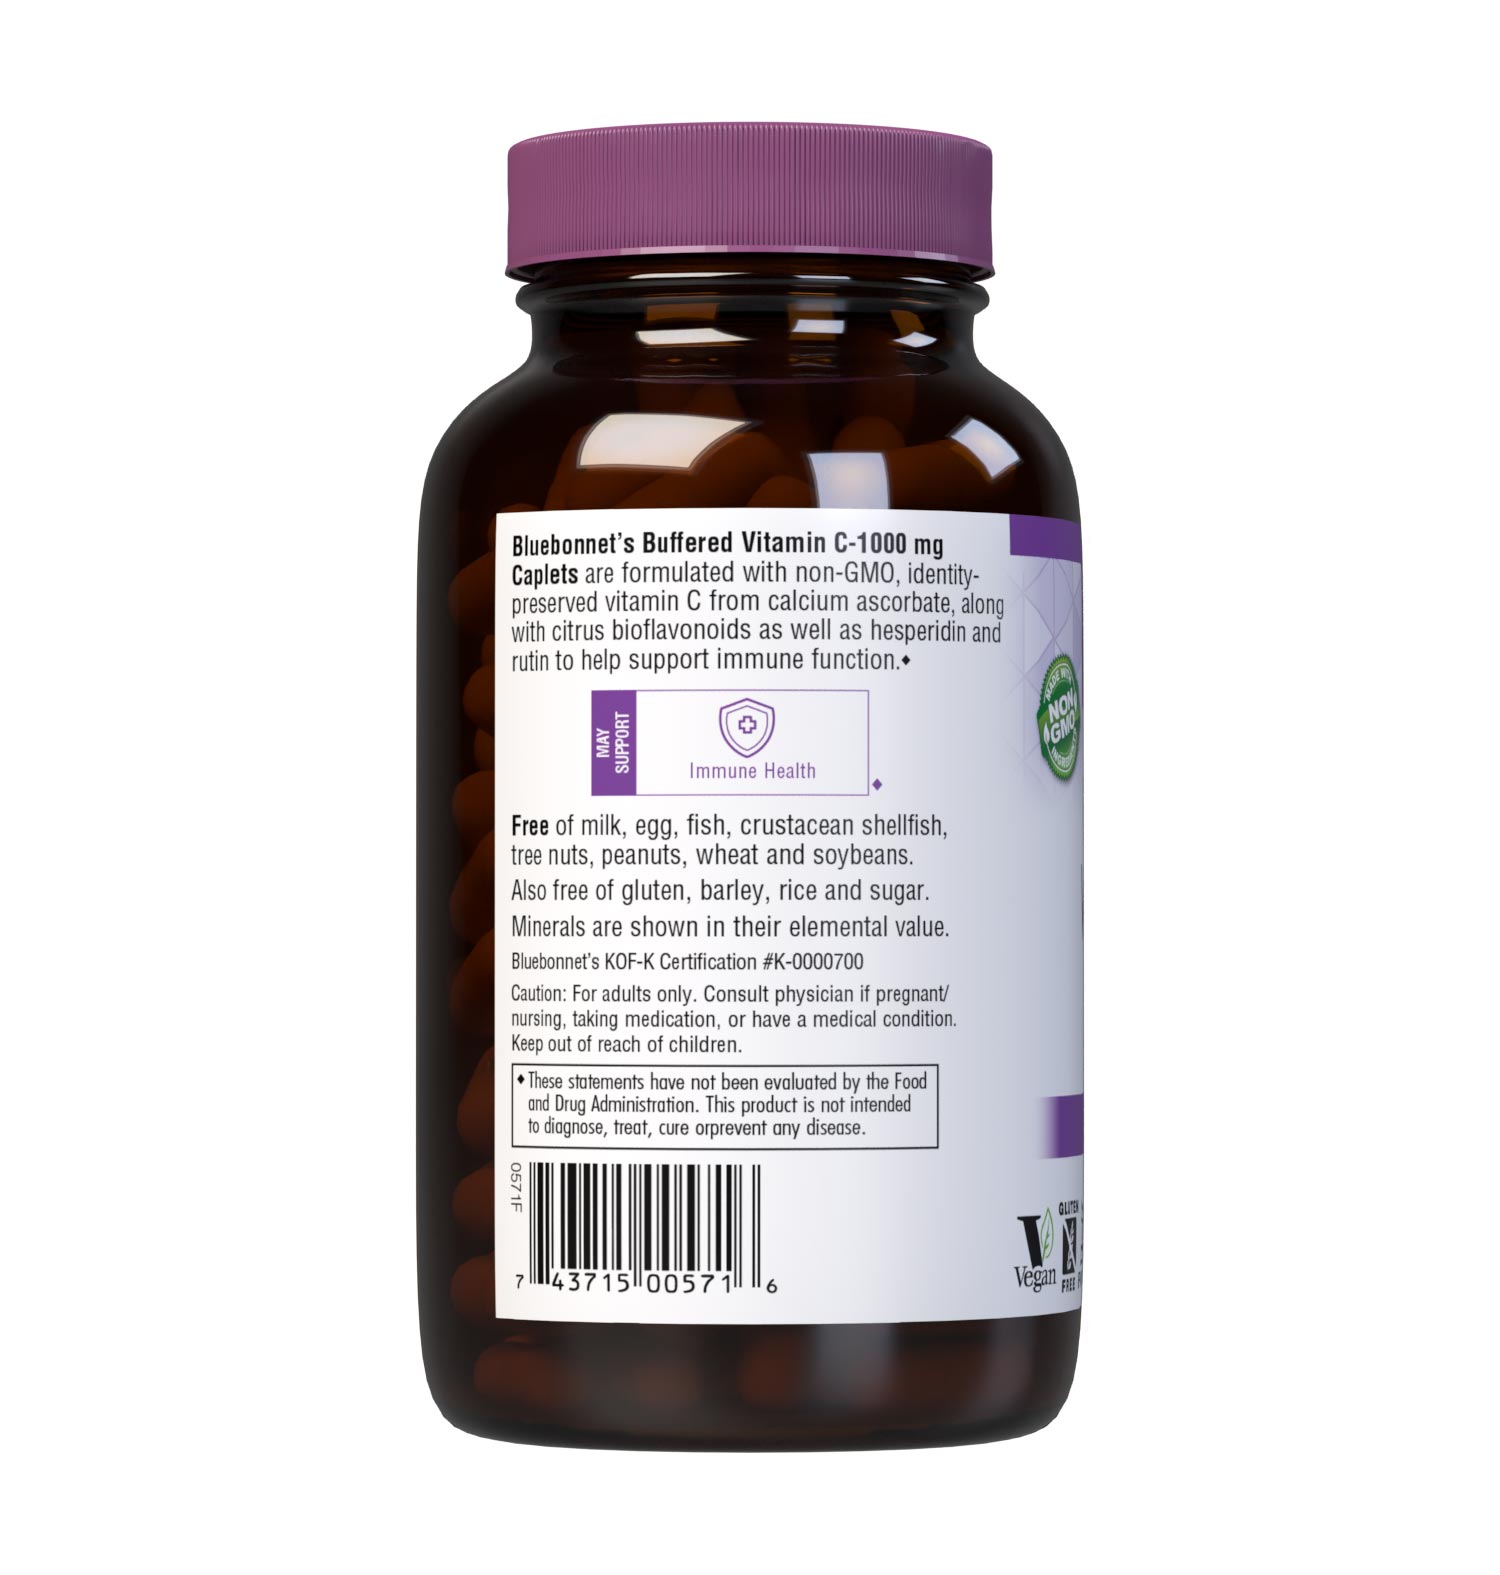 Bluebonnet Nutrition's BUFFERED VITAMIN C-1000 mg 180 caplets is formulated with 1000 mg of identity-preserved (IP) Buffered Vitamin C & Citrus Bioflavonoids and Rutin. Description panel. #size_180 count